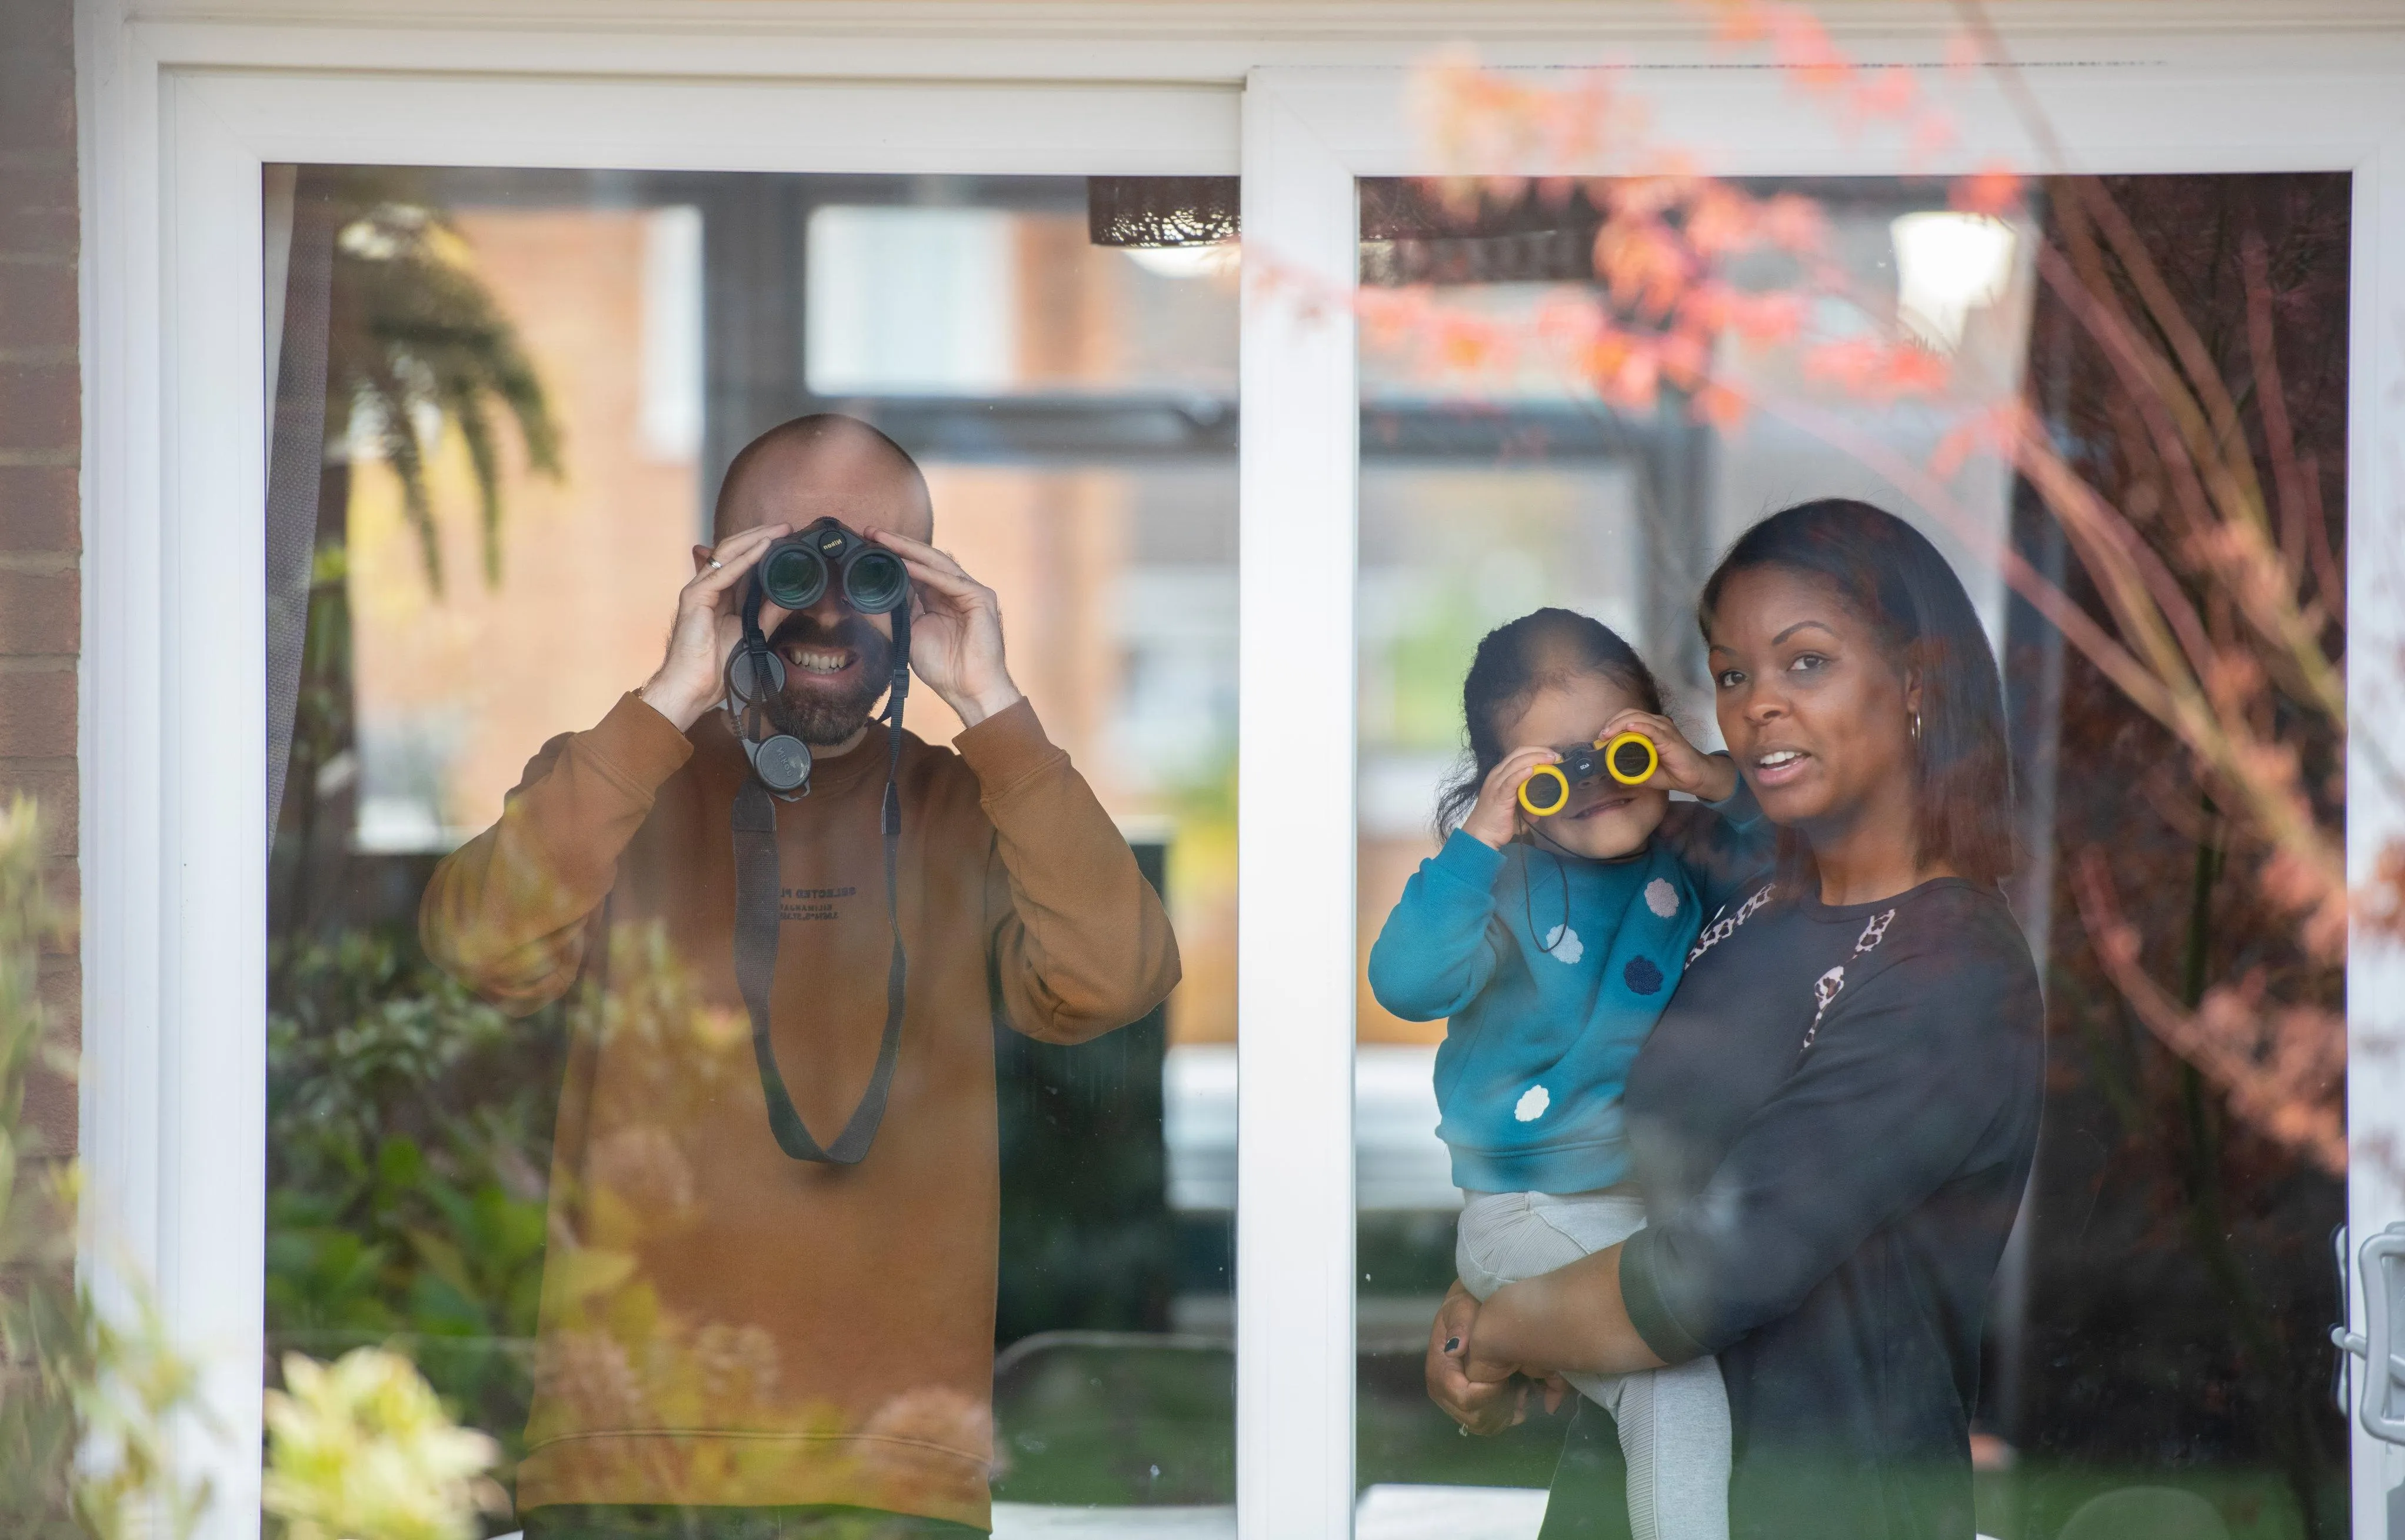 Two adults and a child stood behind a glass door looking out into the garden, one of the adults and the child look through pairs of binoculars.